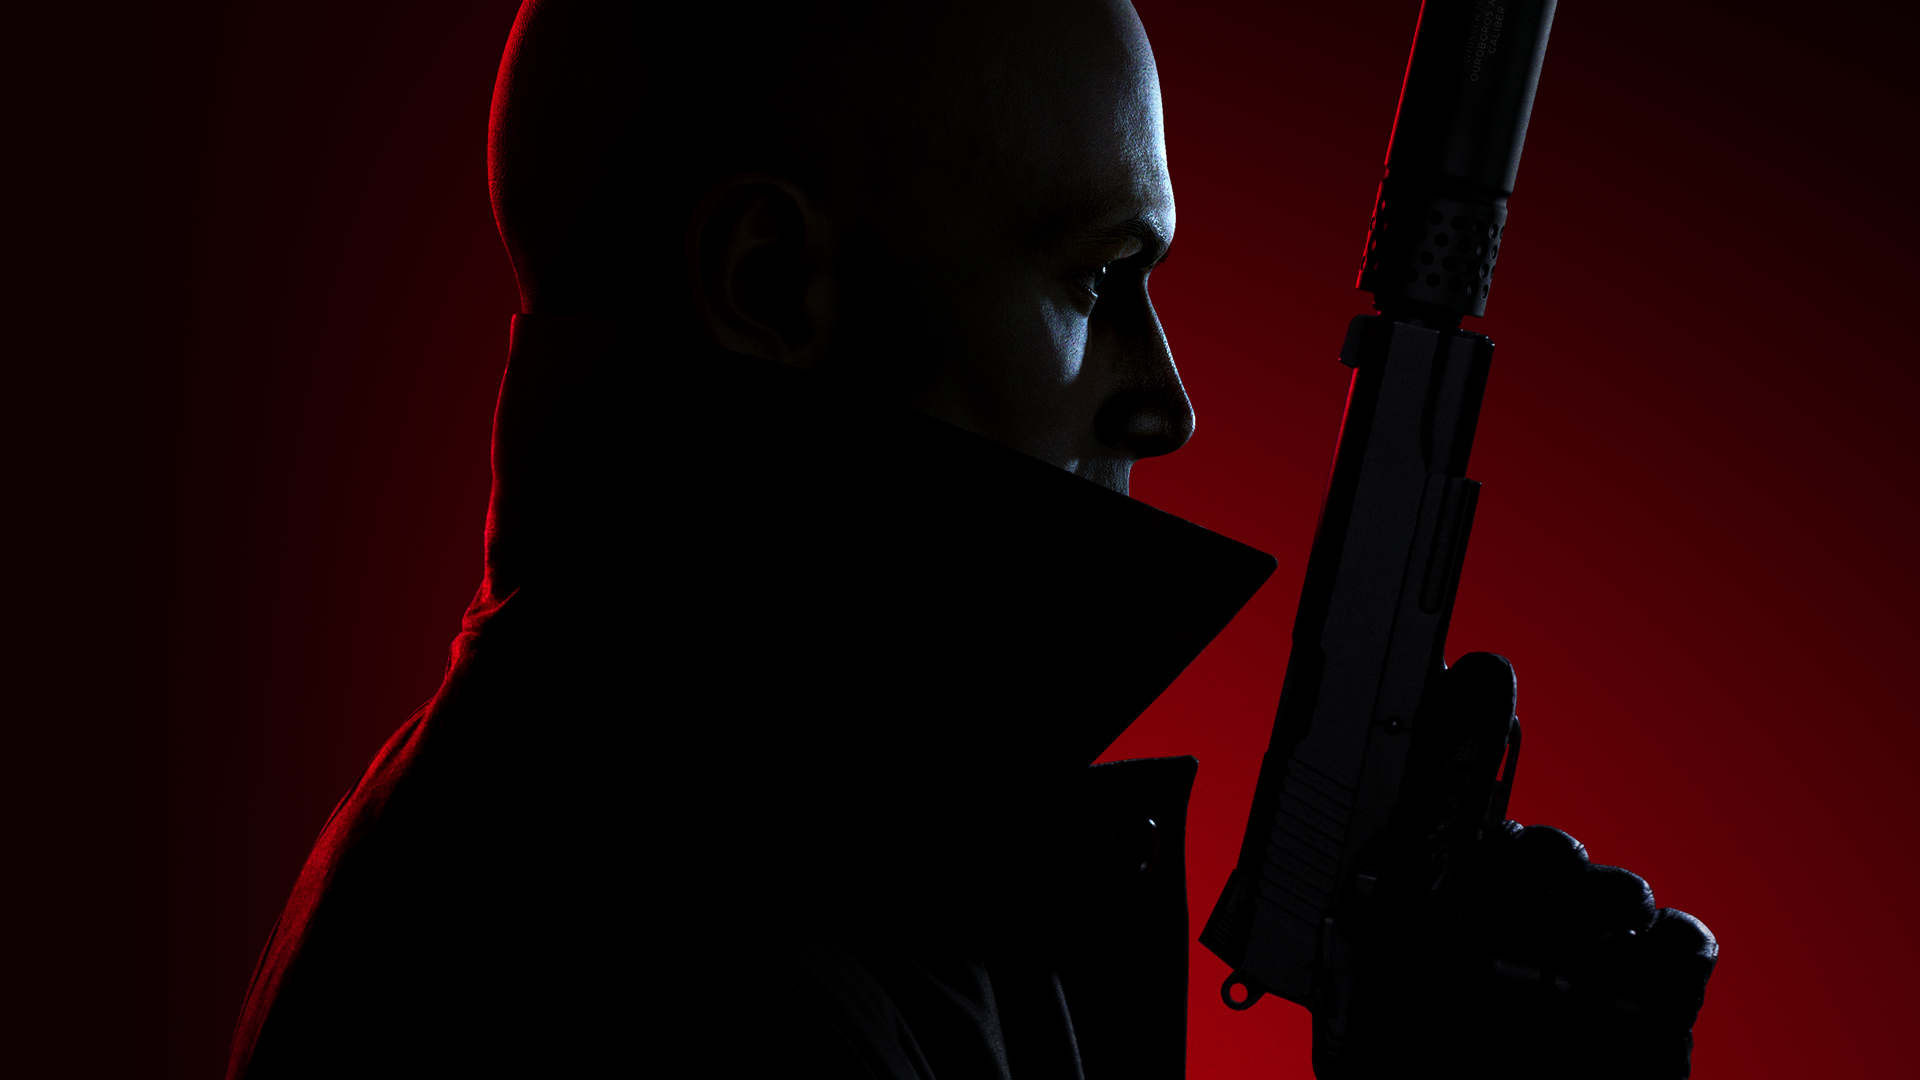 Image for Hitman 3's opening cinematic puts Providence in Agent 47's crosshairs